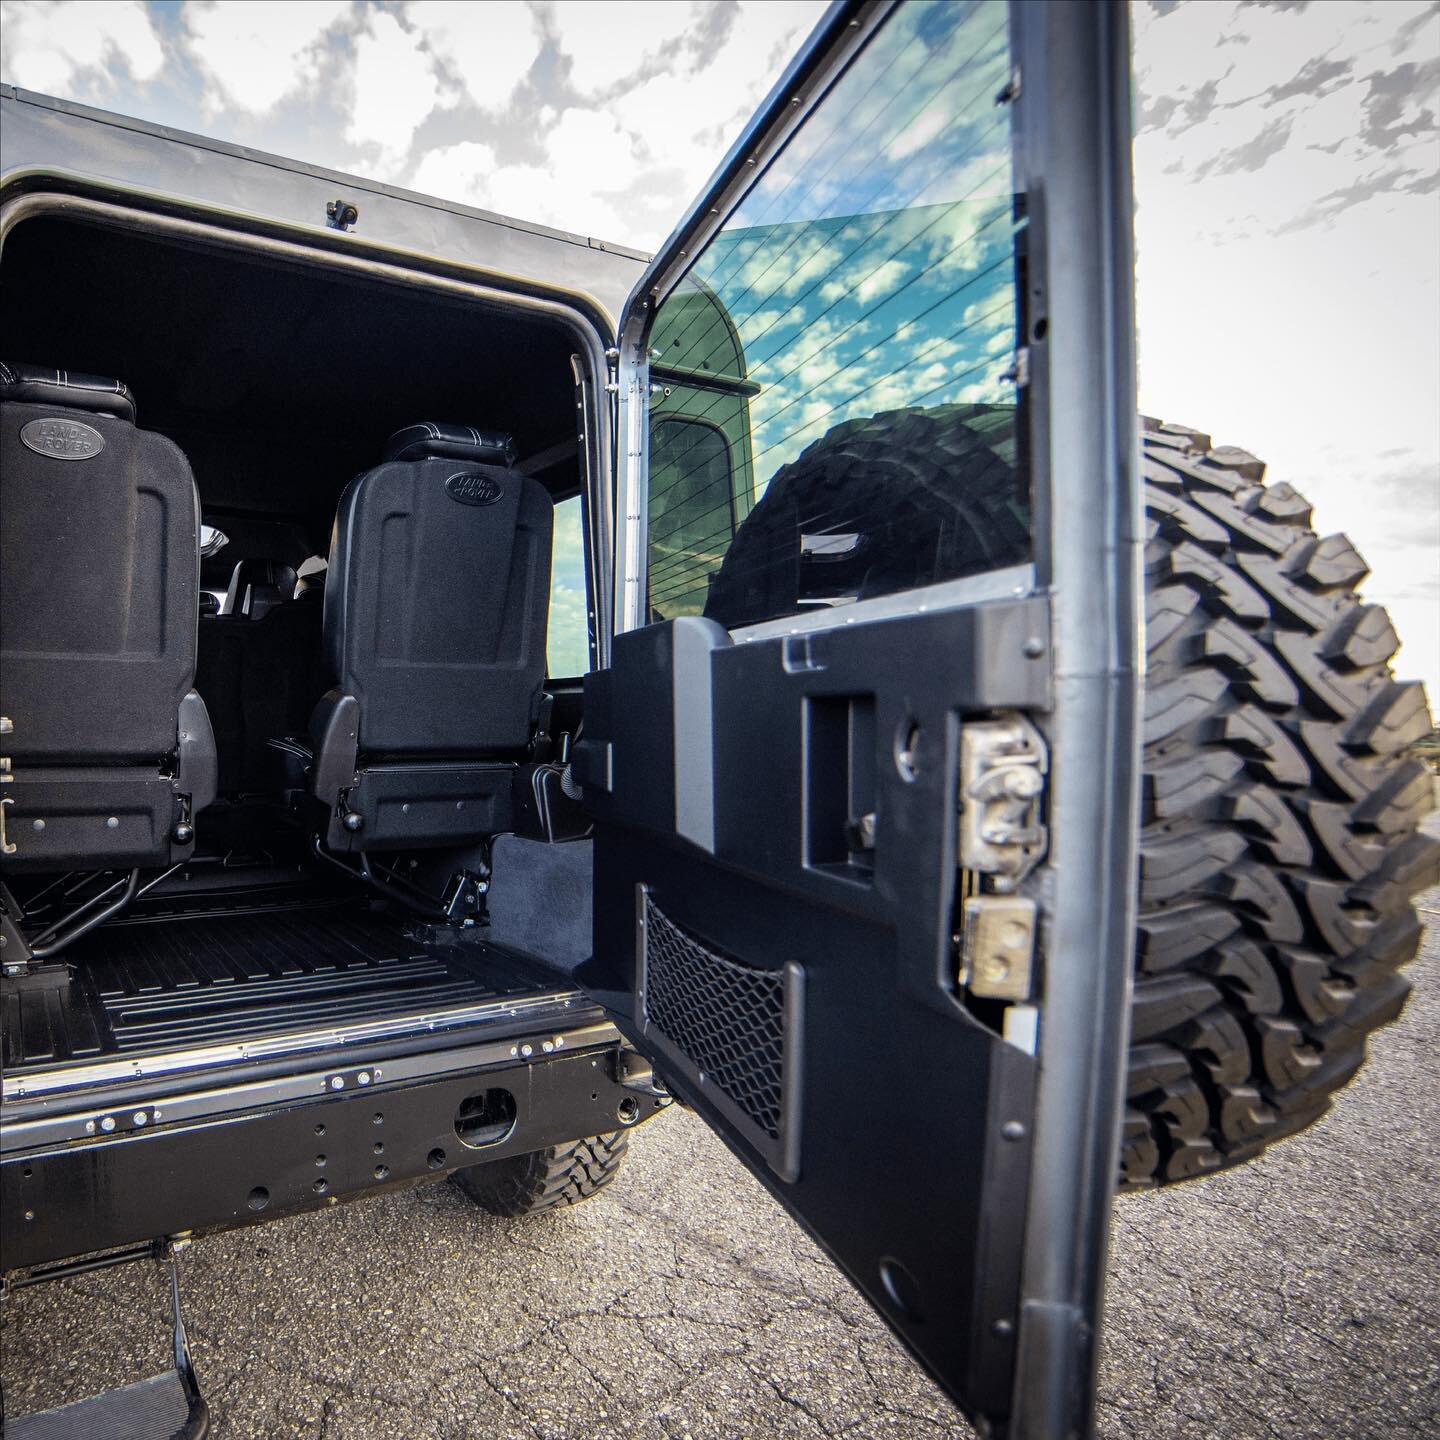 New rear folding seats for seven passengers, Front and rear disc brake conversion, Magnaflow exhaust system...

#MonarchMotors
*
*
*
*
*
#landrover #rangeroversport #landroverdefender #defender #defender110 #defender90 #offroad #defenderlove #offroad